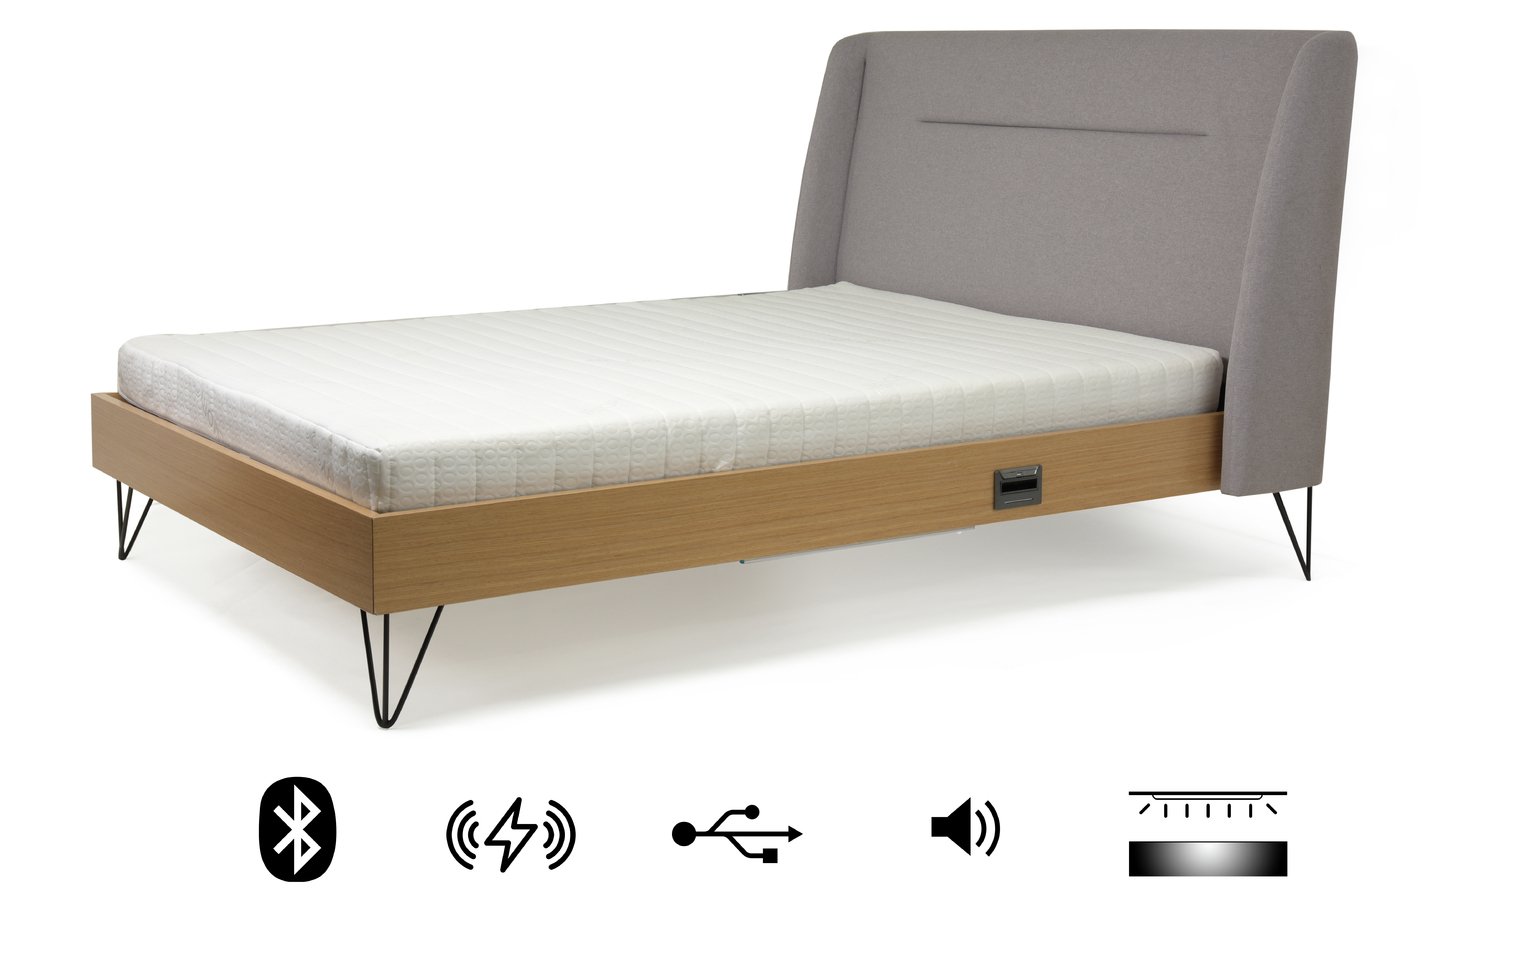 Koble Snor wireless charging Bluetooth Kingsize Bed Frame